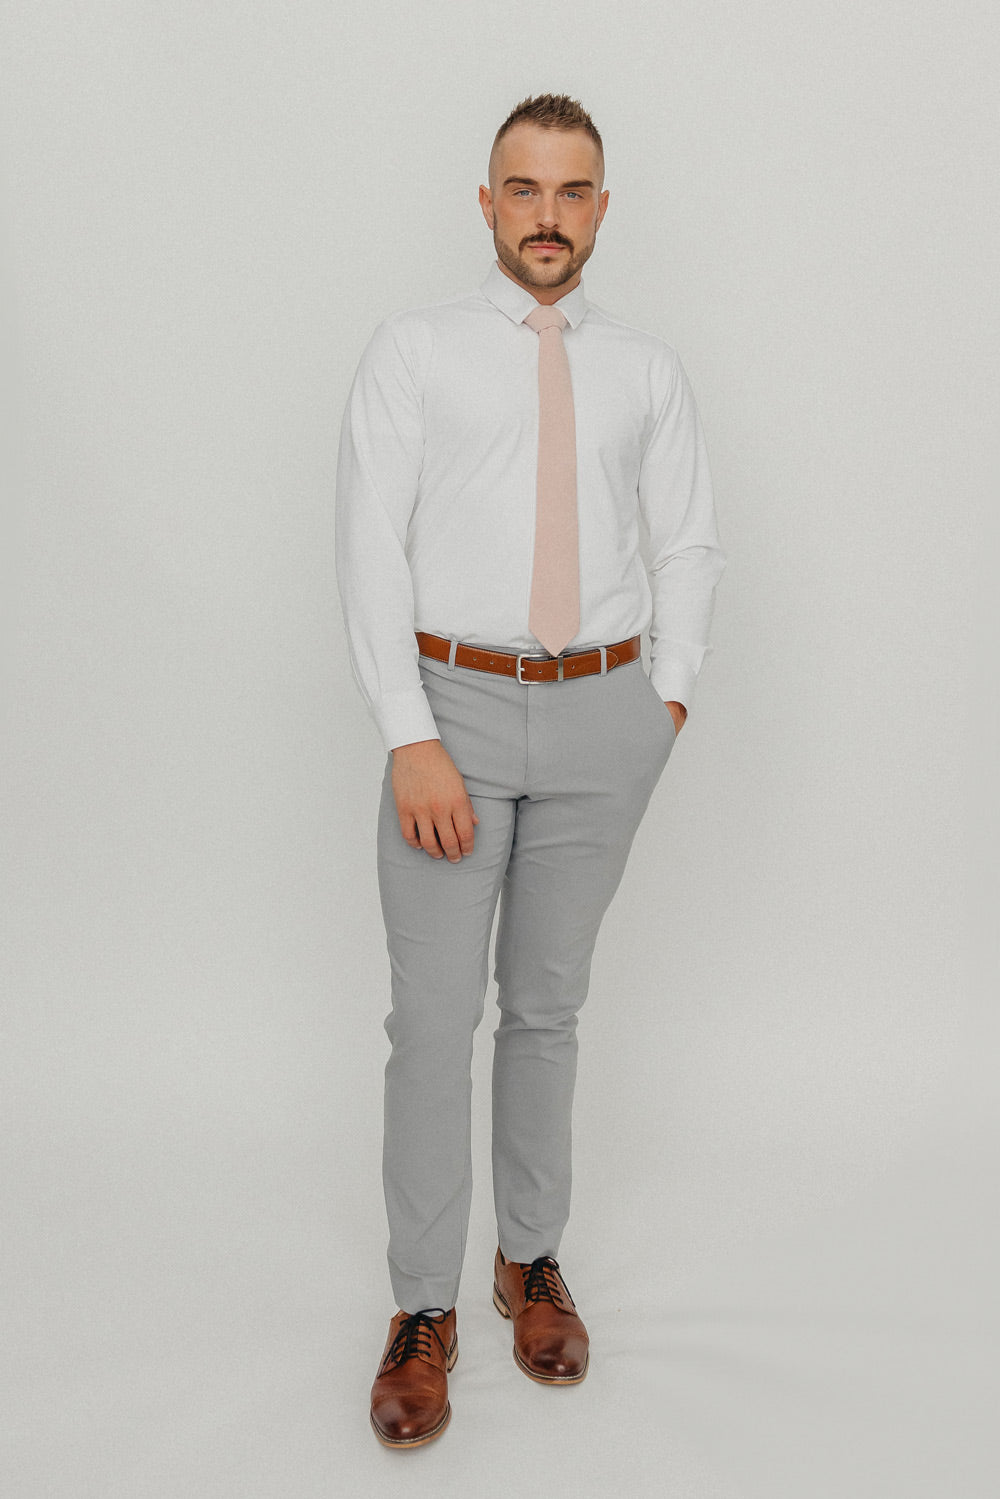 Mauve tie worn with a white shirt, brown belt and gray pants.